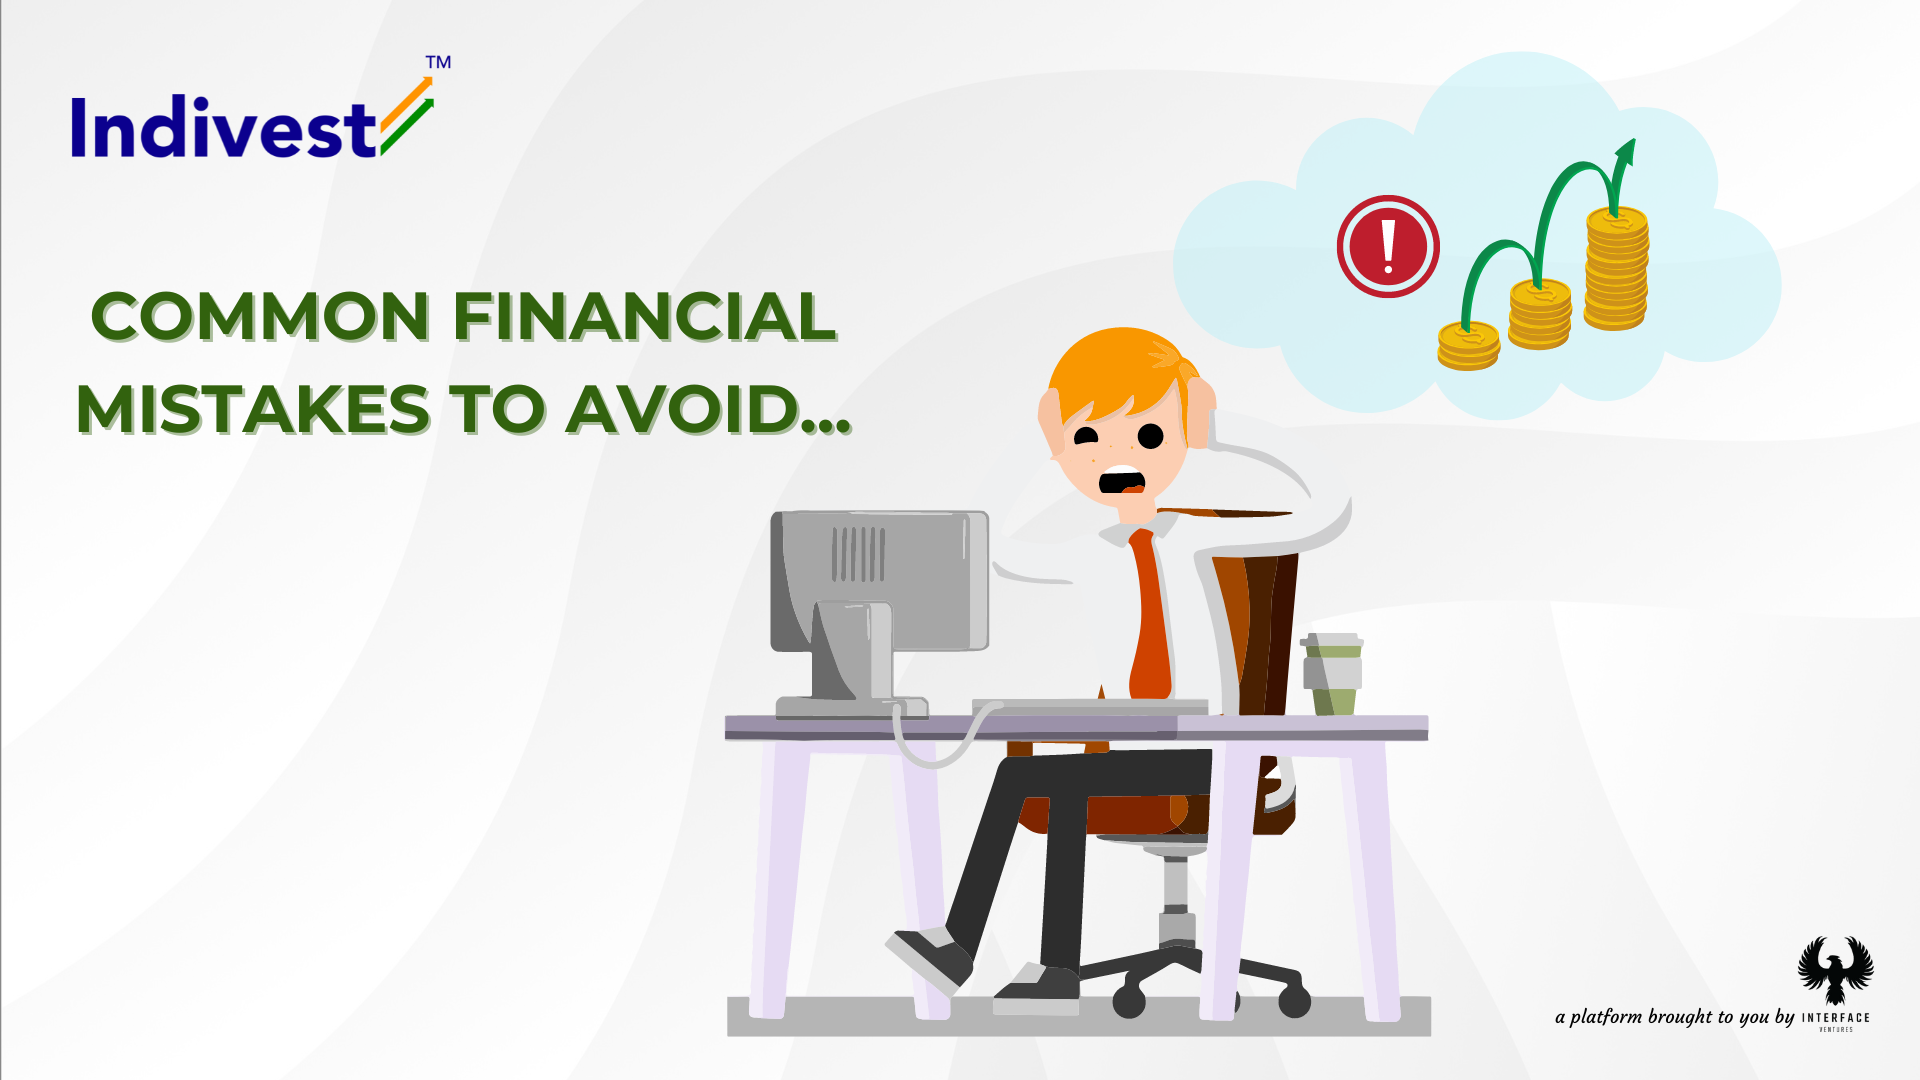 Infographic illustrating common financial mistakes to avoid such as not saving for emergencies, falling into debt traps, neglecting early investments, and overlooking tax planning and insurance